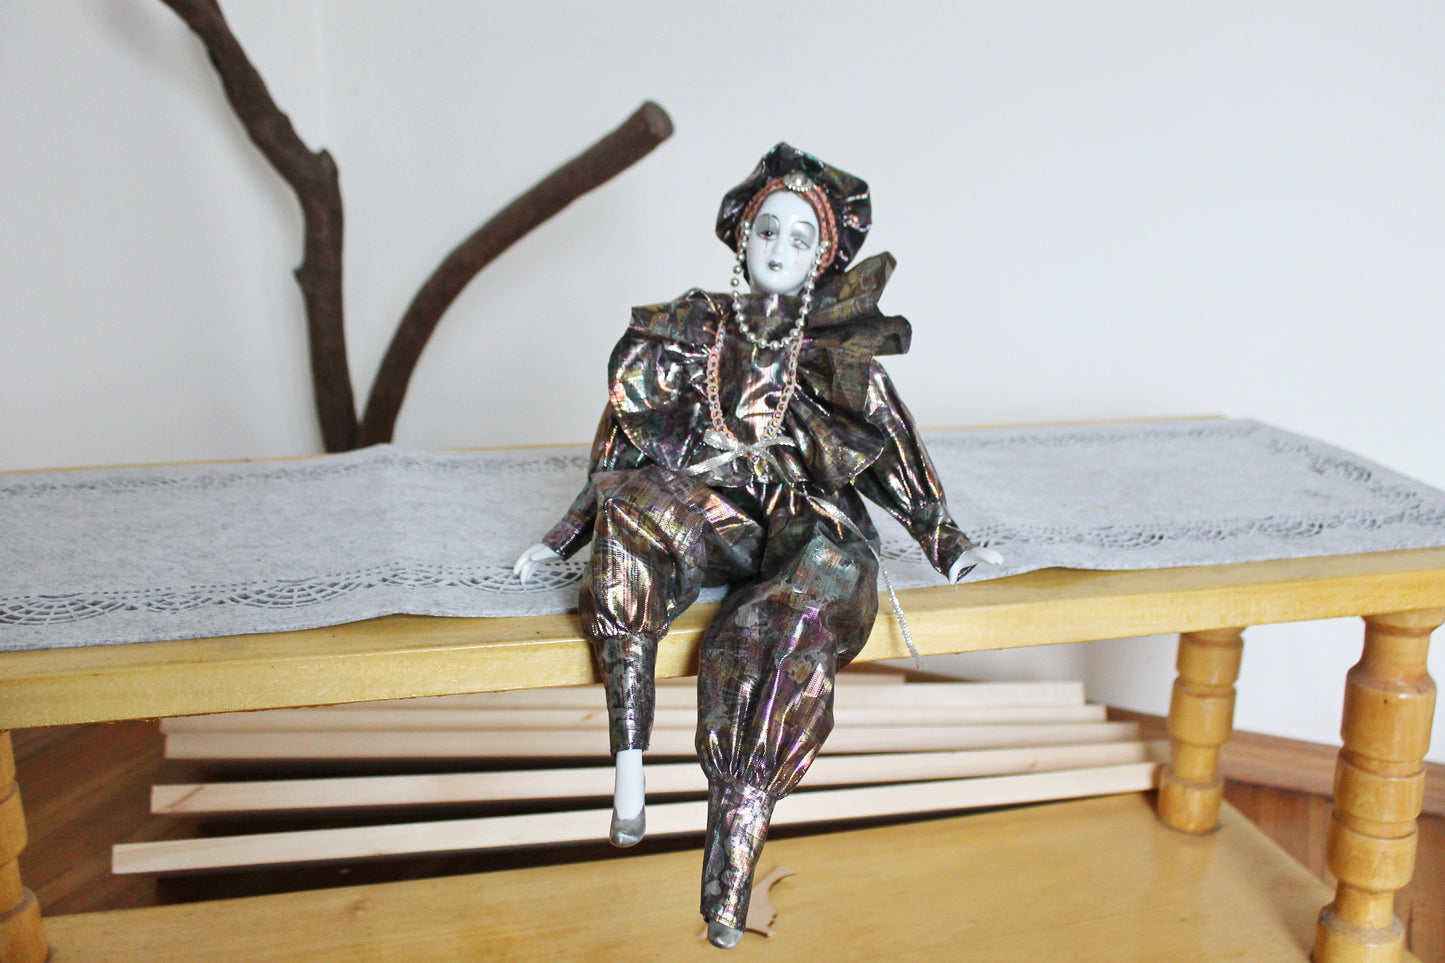 Vintage porcelain Venetian doll - Harlequin - 16.2 inches- collectible doll - porcelain doll - decor doll - 1980s